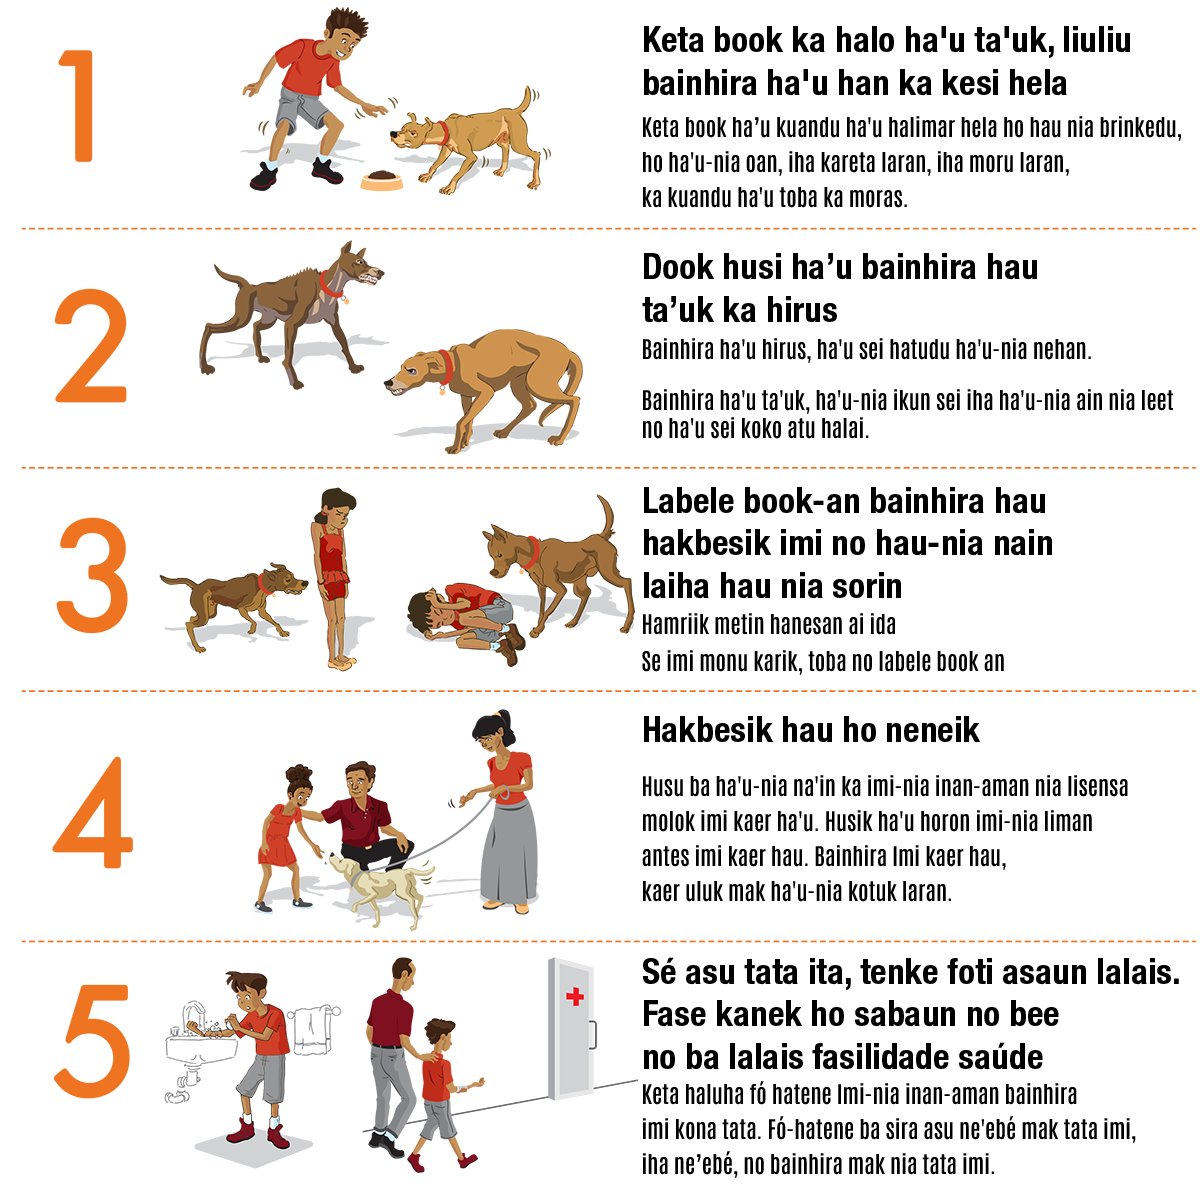 #Rabies is a disease that kills people & dogs. If a dog has rabies & it bites you it can give you the disease. If you get bitten, wash your wound immediately & thoroughly and get medical help - it could save your life. Here are 5 tips to prevent dog bites: